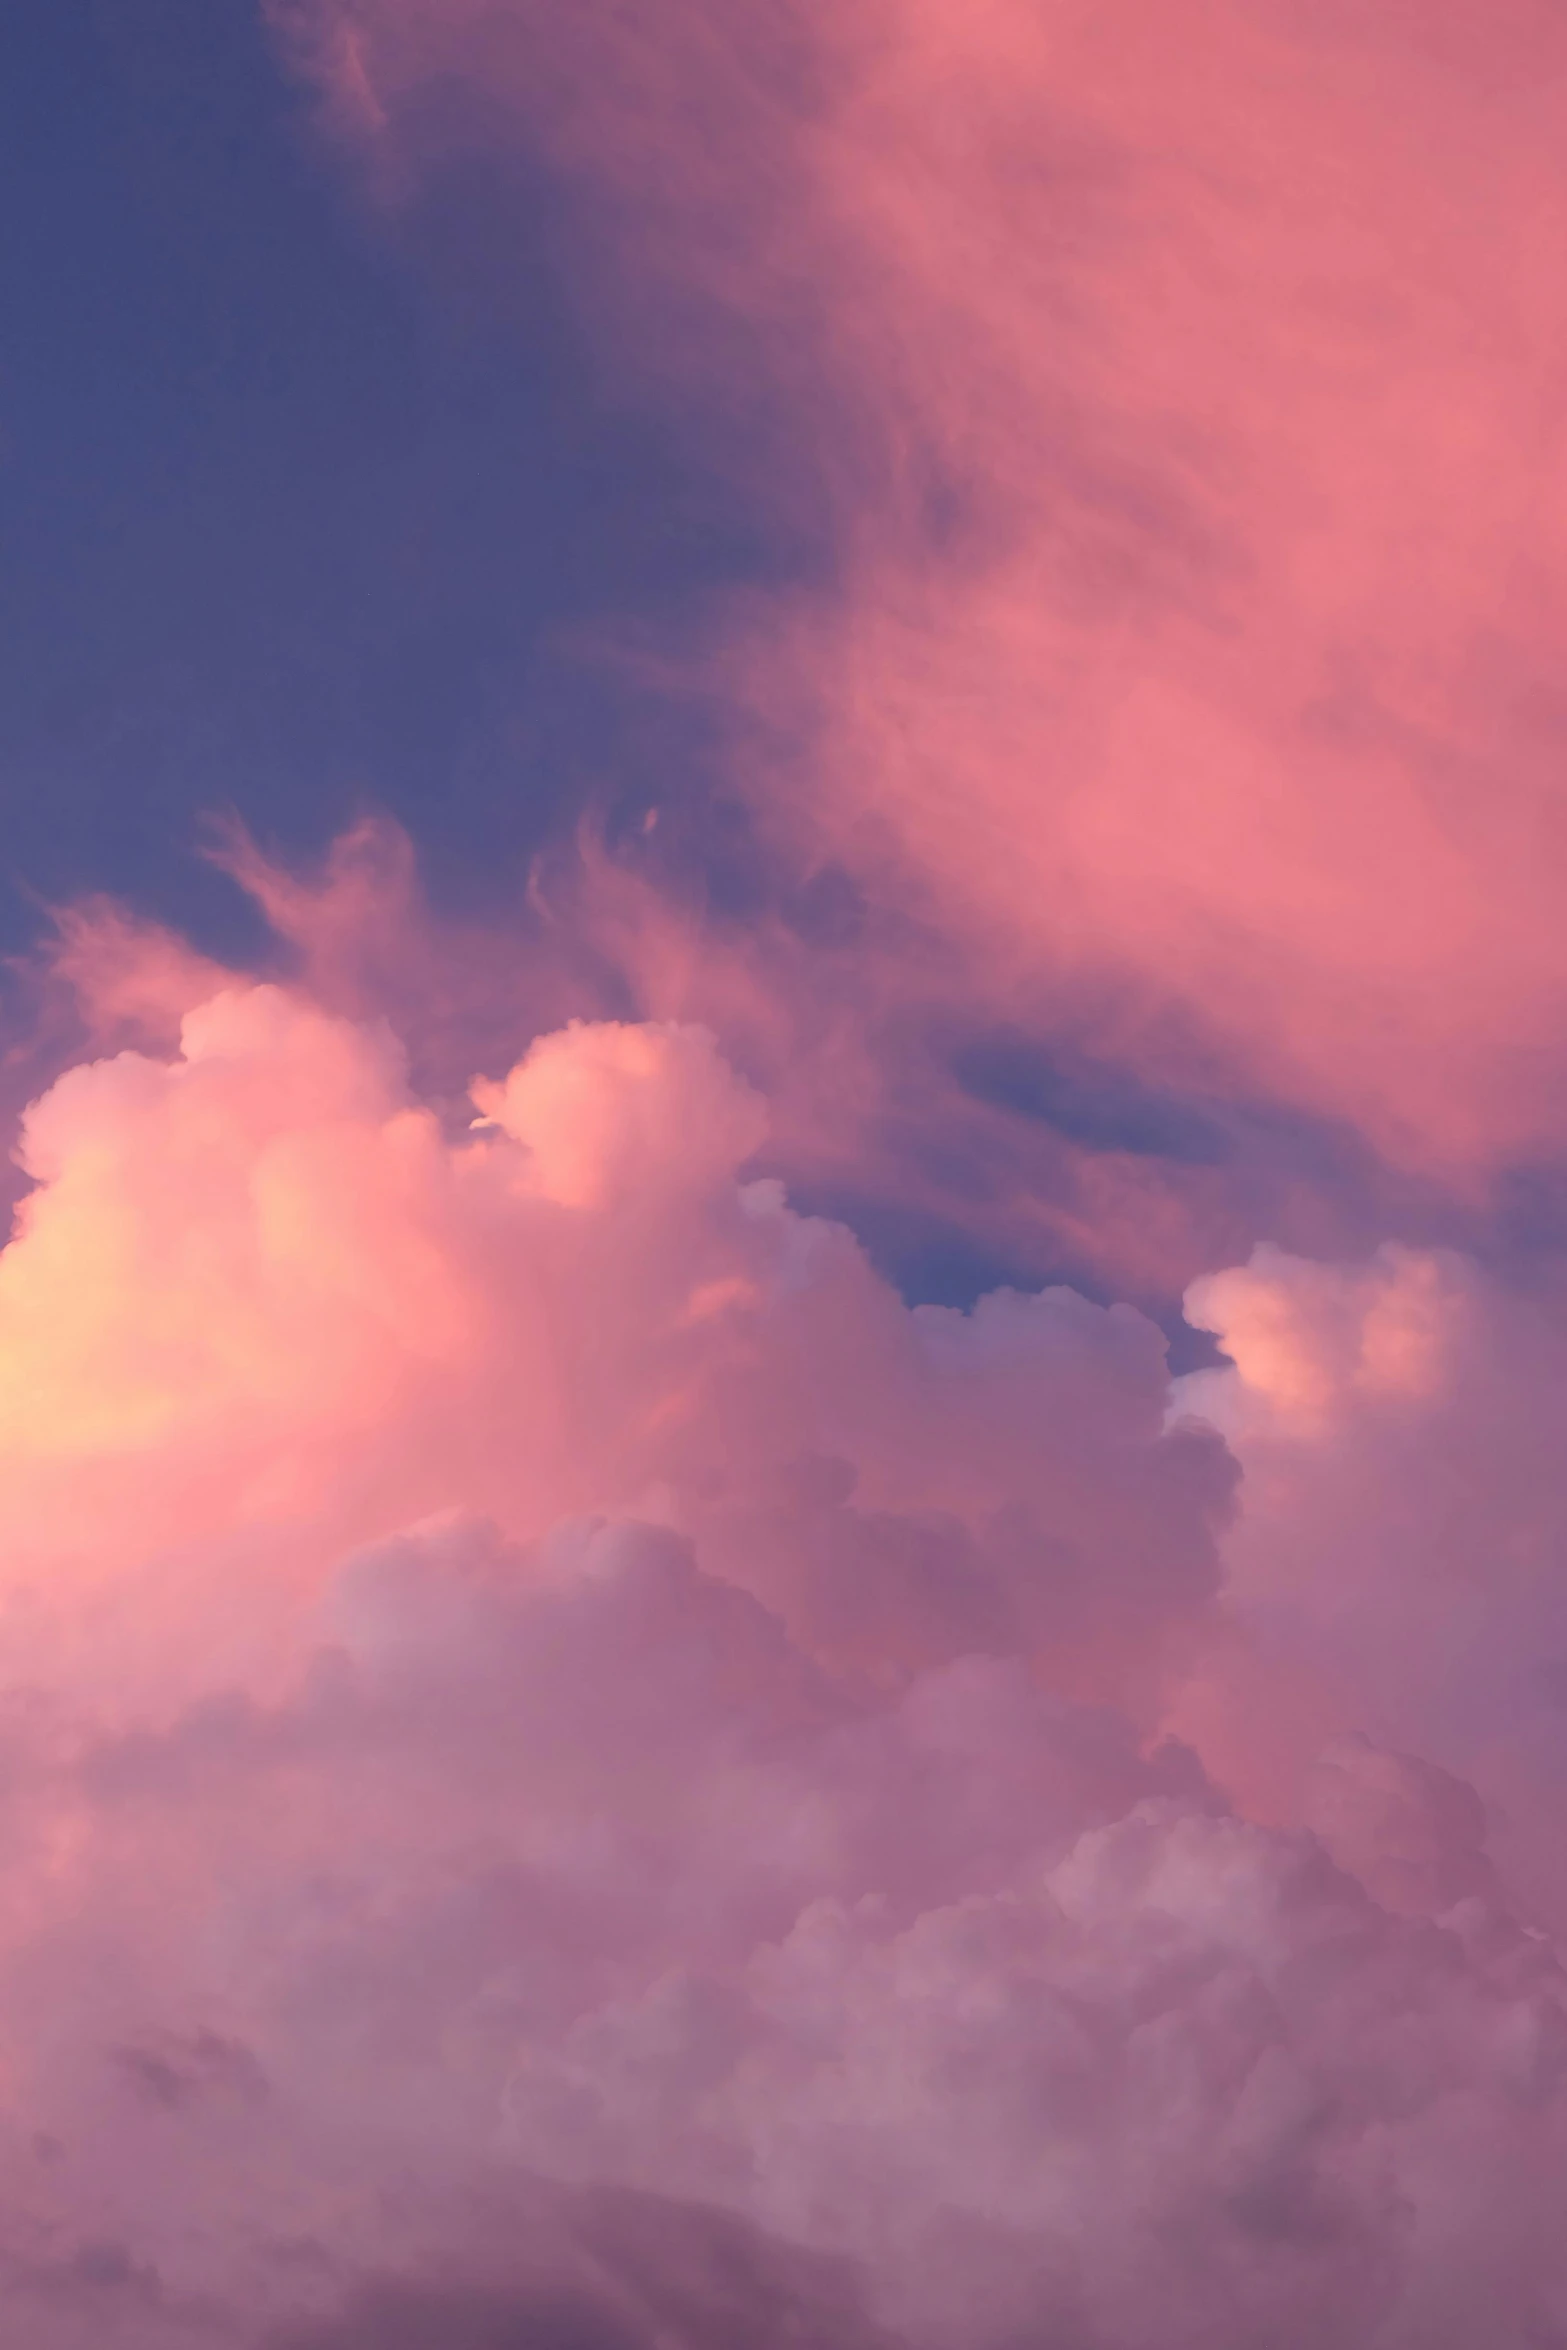 there is a plane that is flying in the sky, unsplash, romanticism, pink tinged heavenly clouds, major arcana sky, ((pink)), cumulus